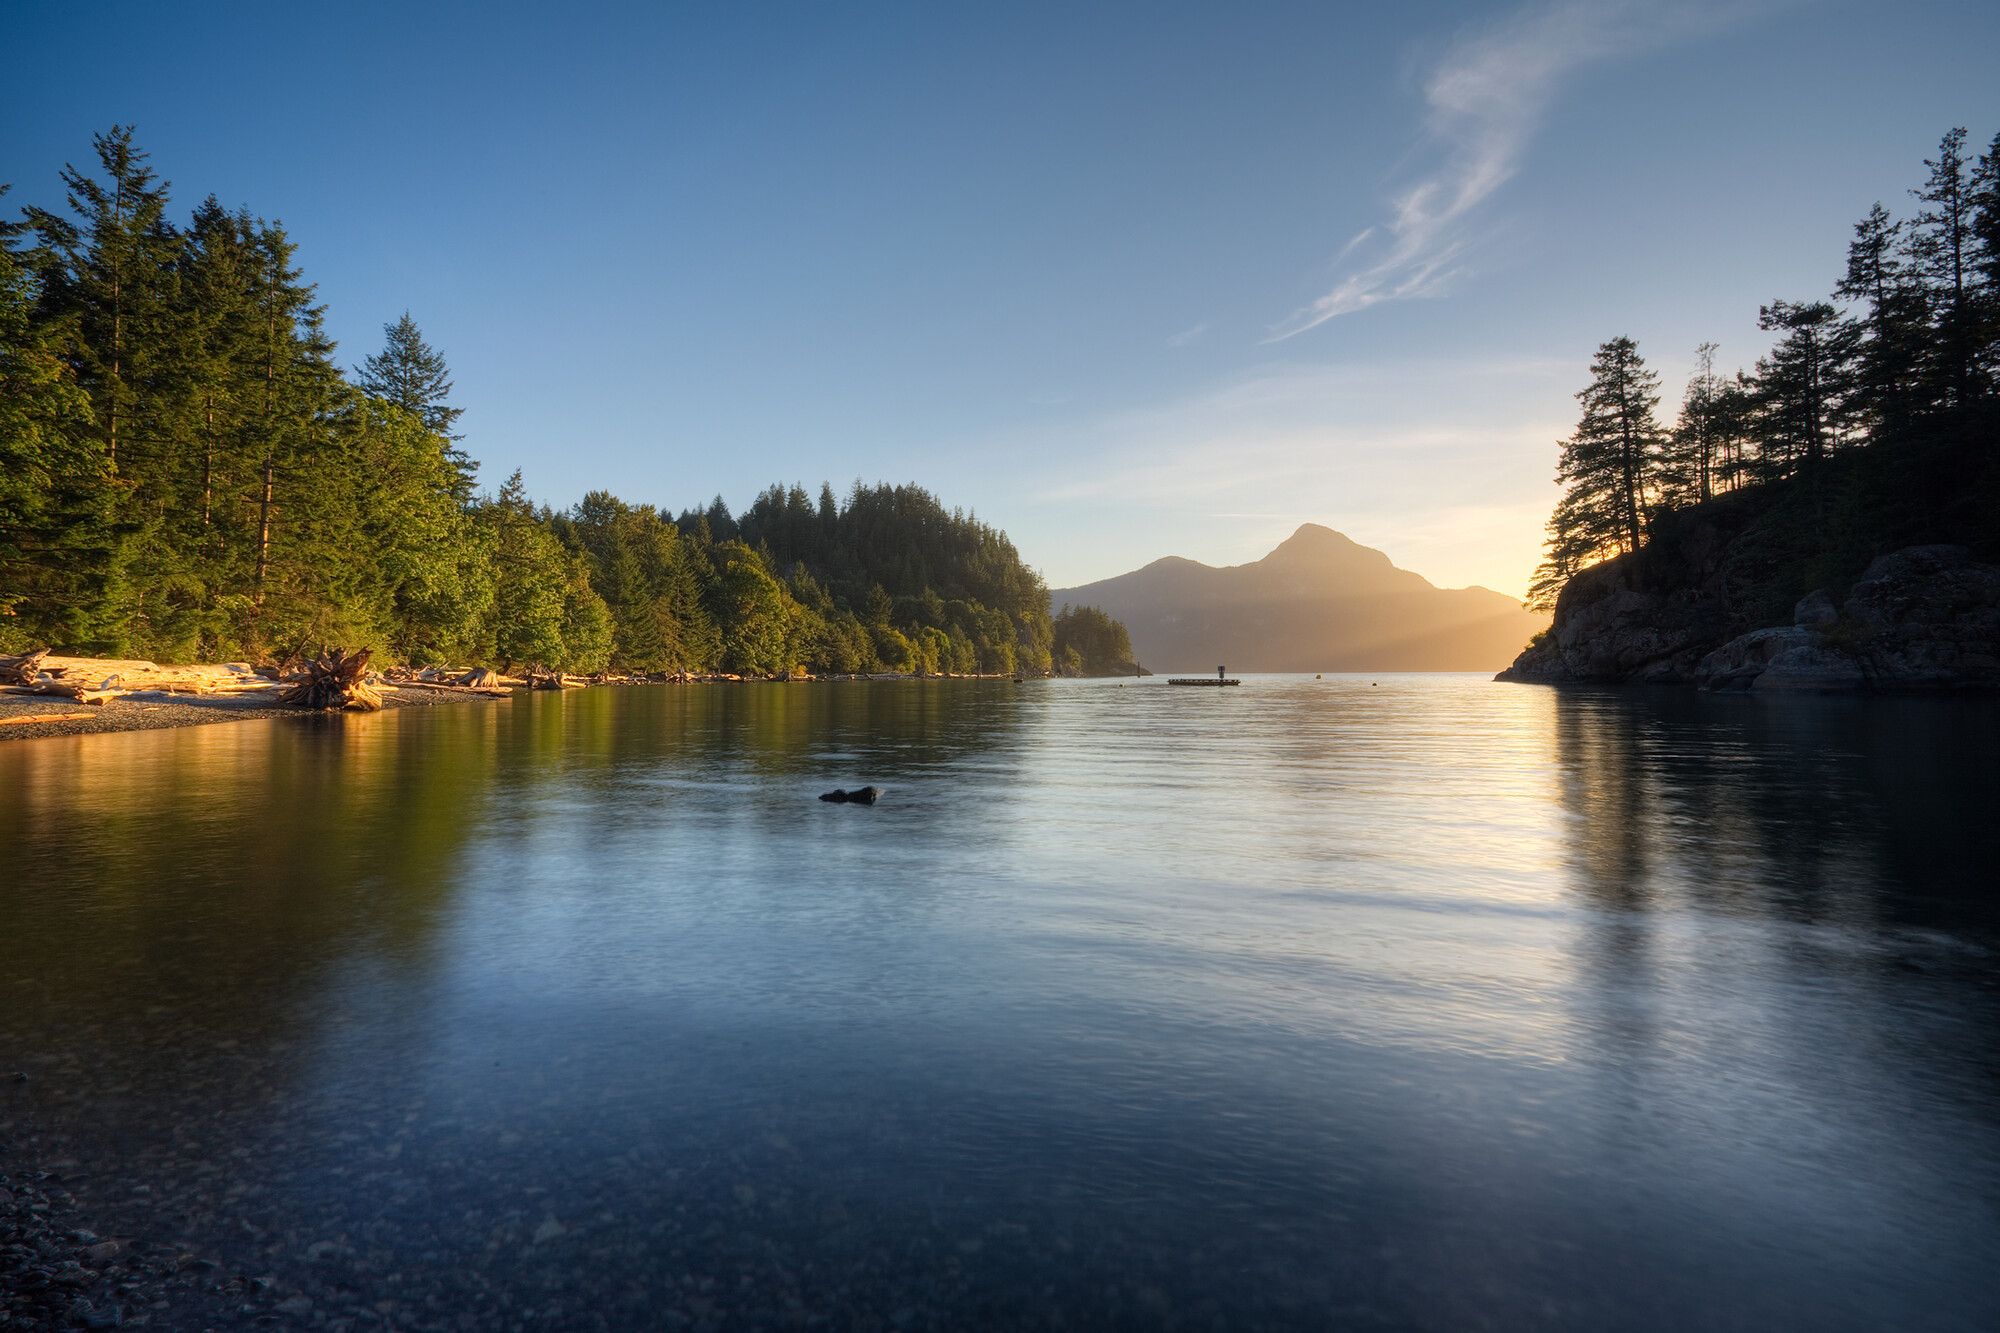 Calm water in the bay at sunset. Porteau Cove Park.